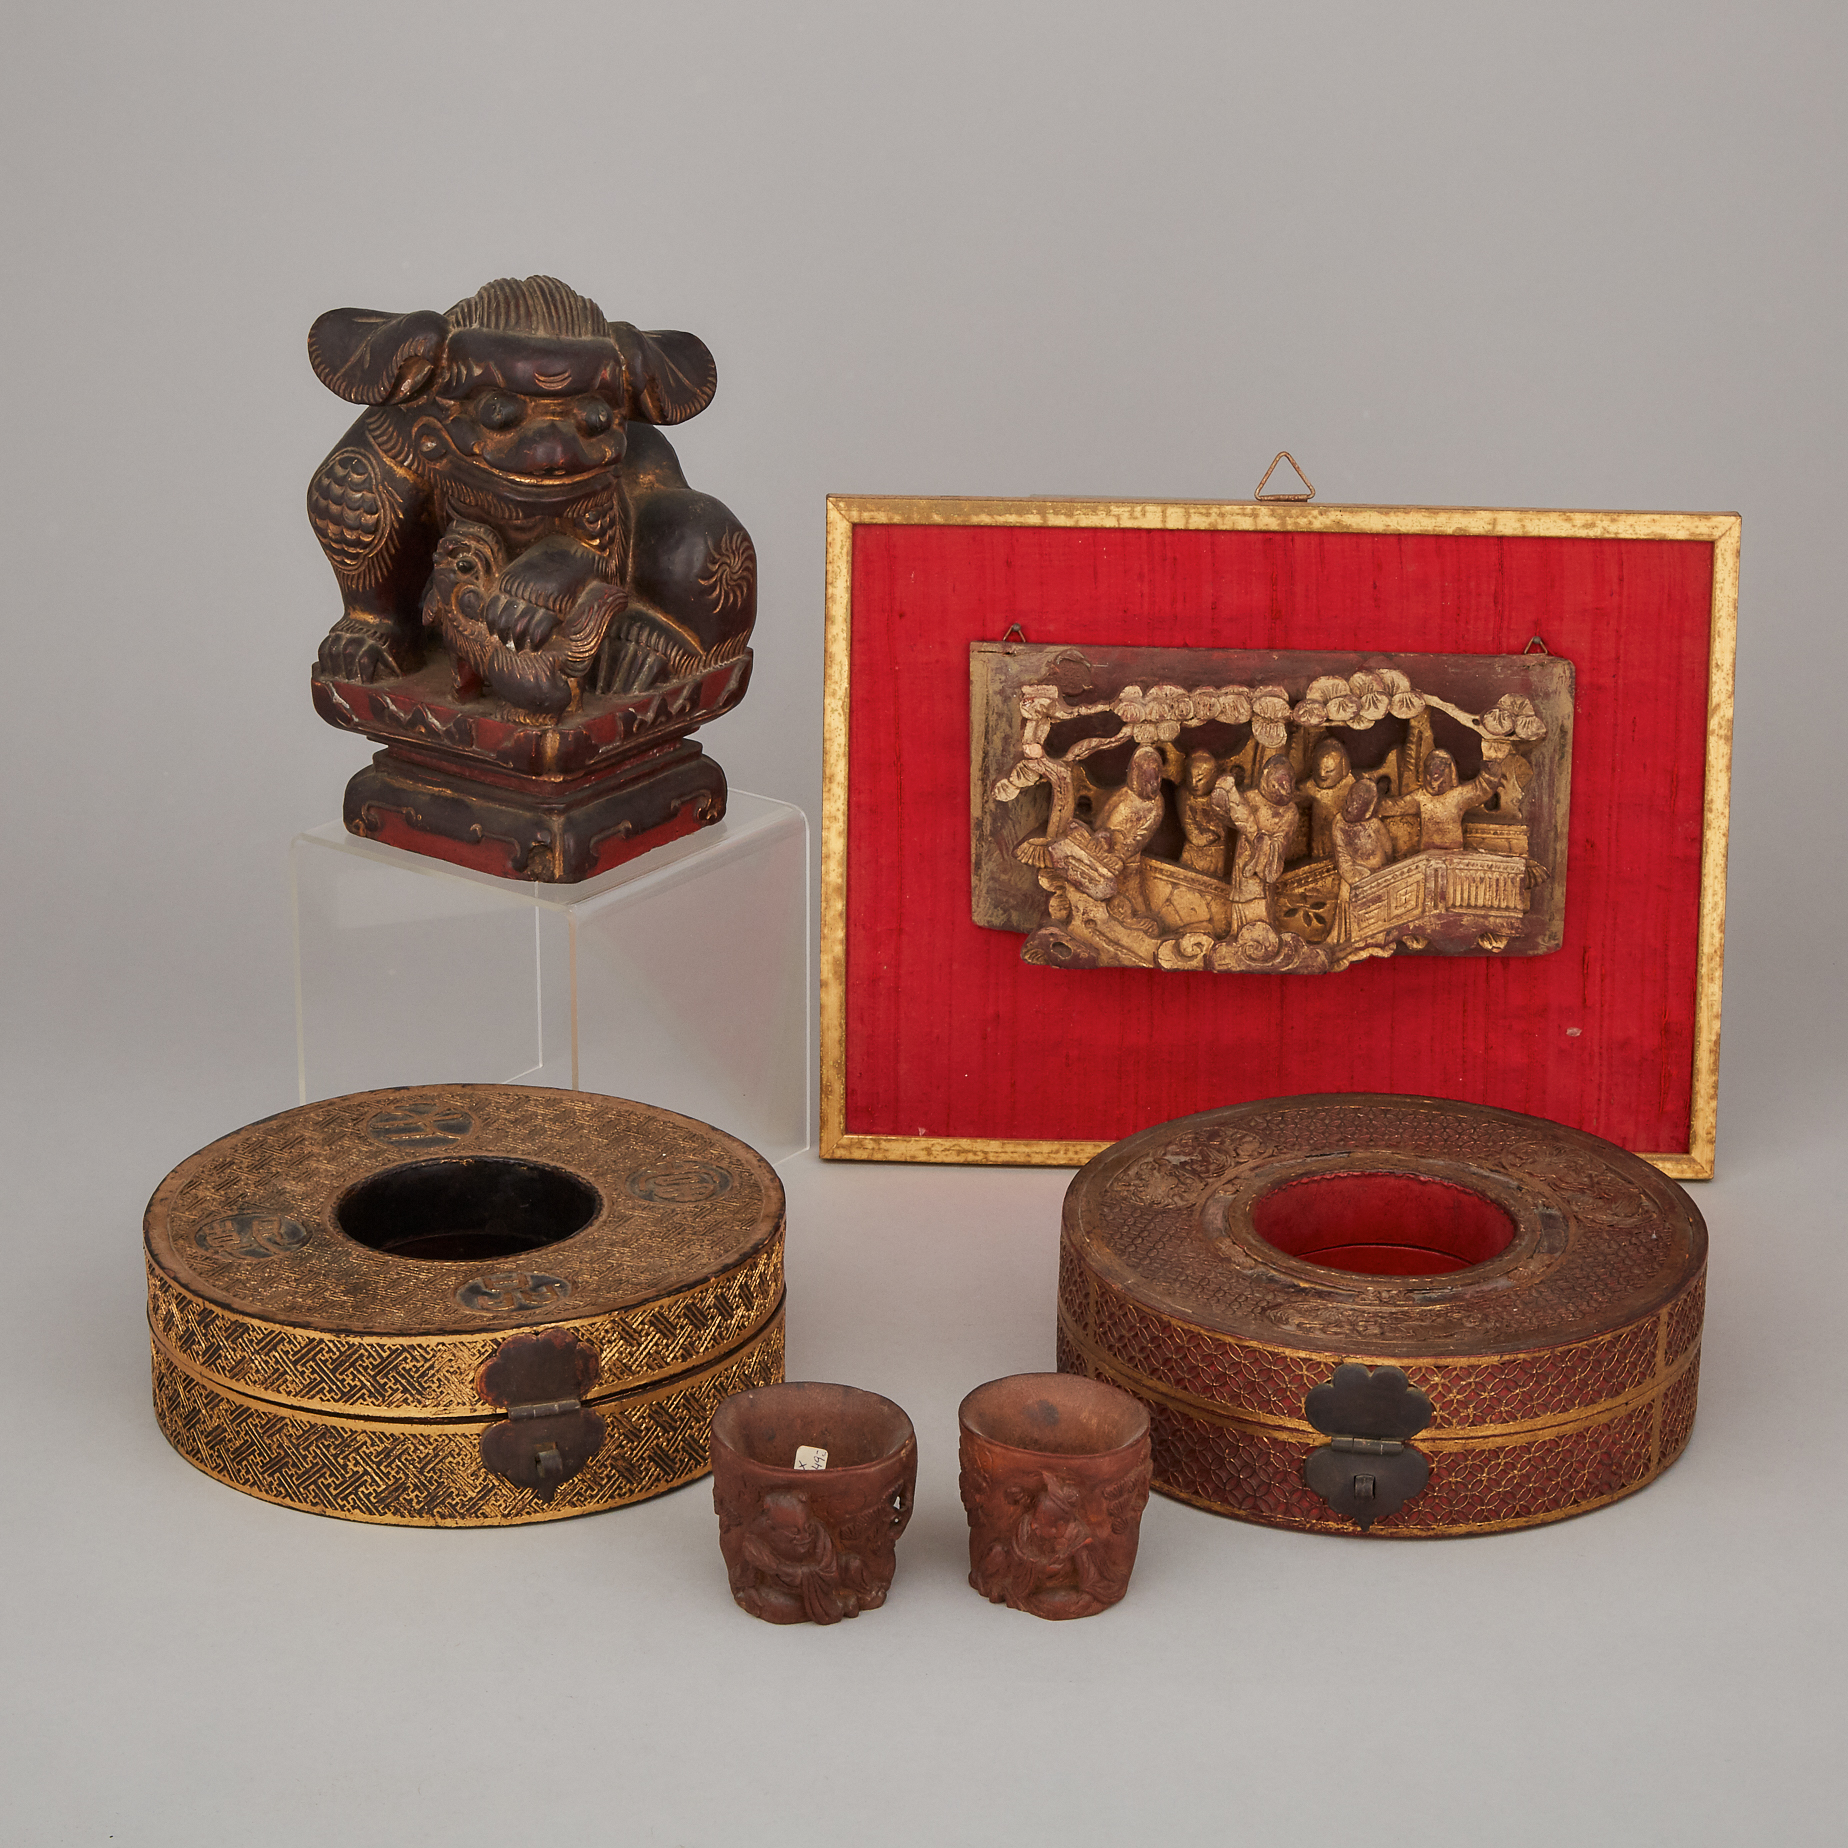 A Group of Six Chinese Lacquer, Bamboo and Wood Carved Wares, 19th Century